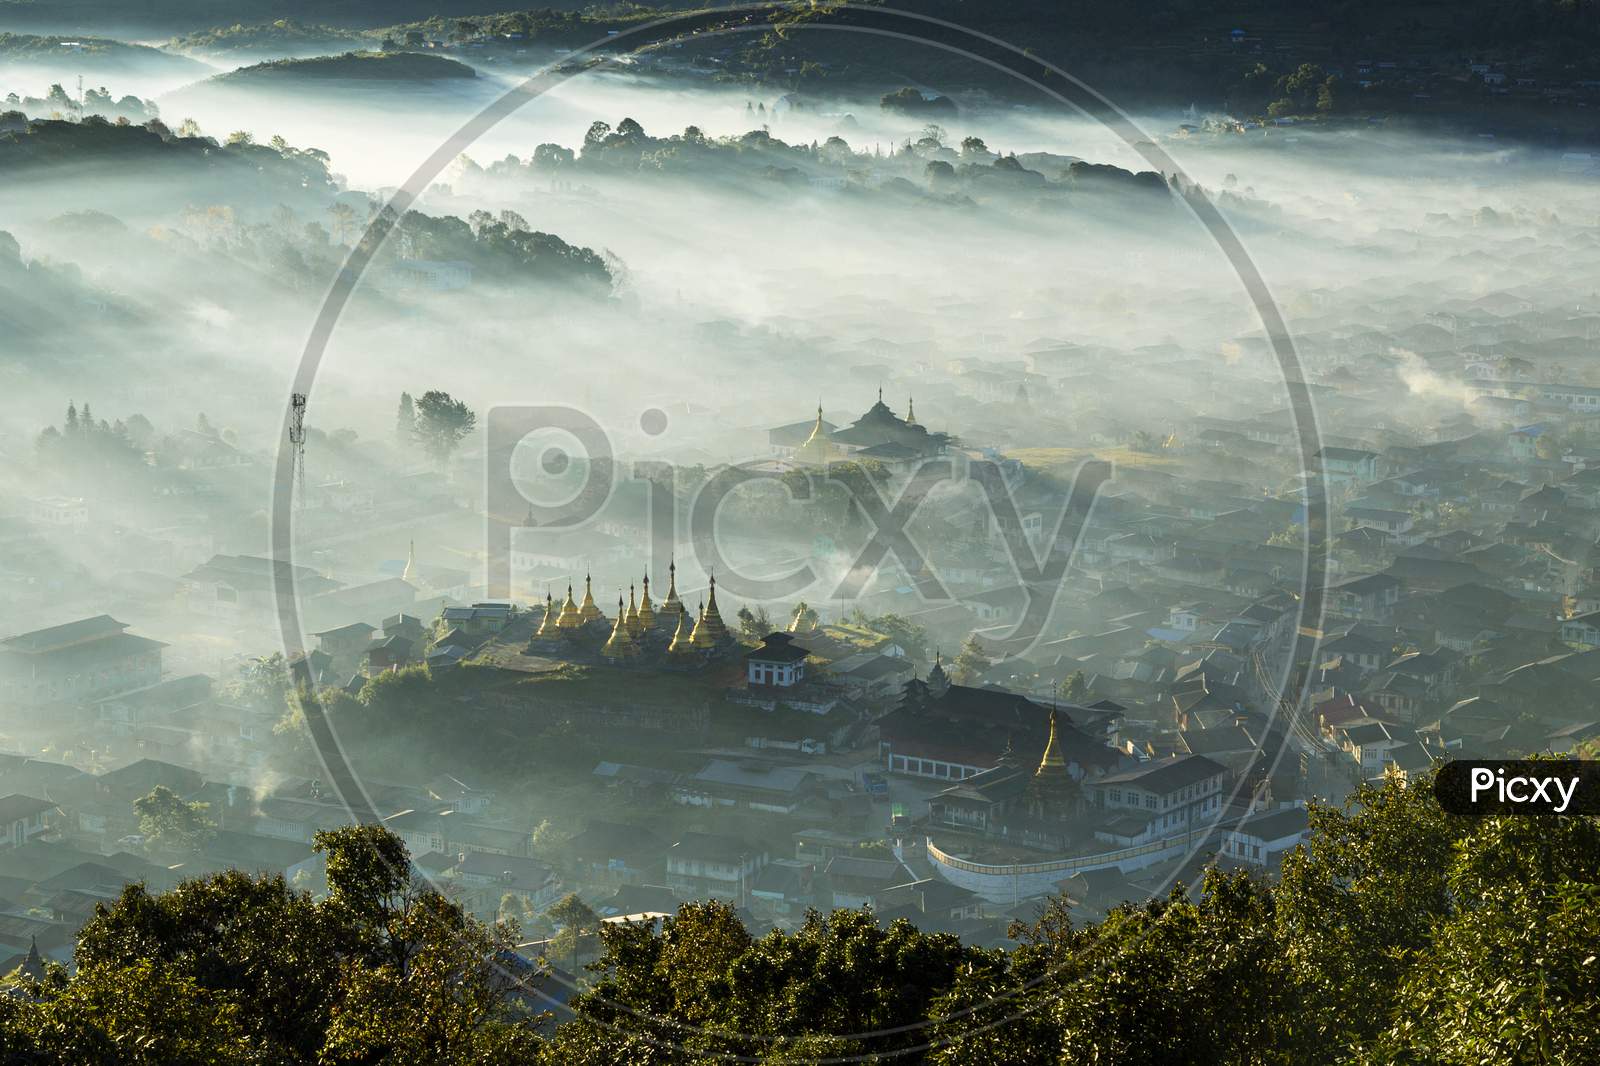 Mogok is a city in the Pyin Oo Lwin District of Mandalay Region of Myanmar,located 200km north of Mandalay.